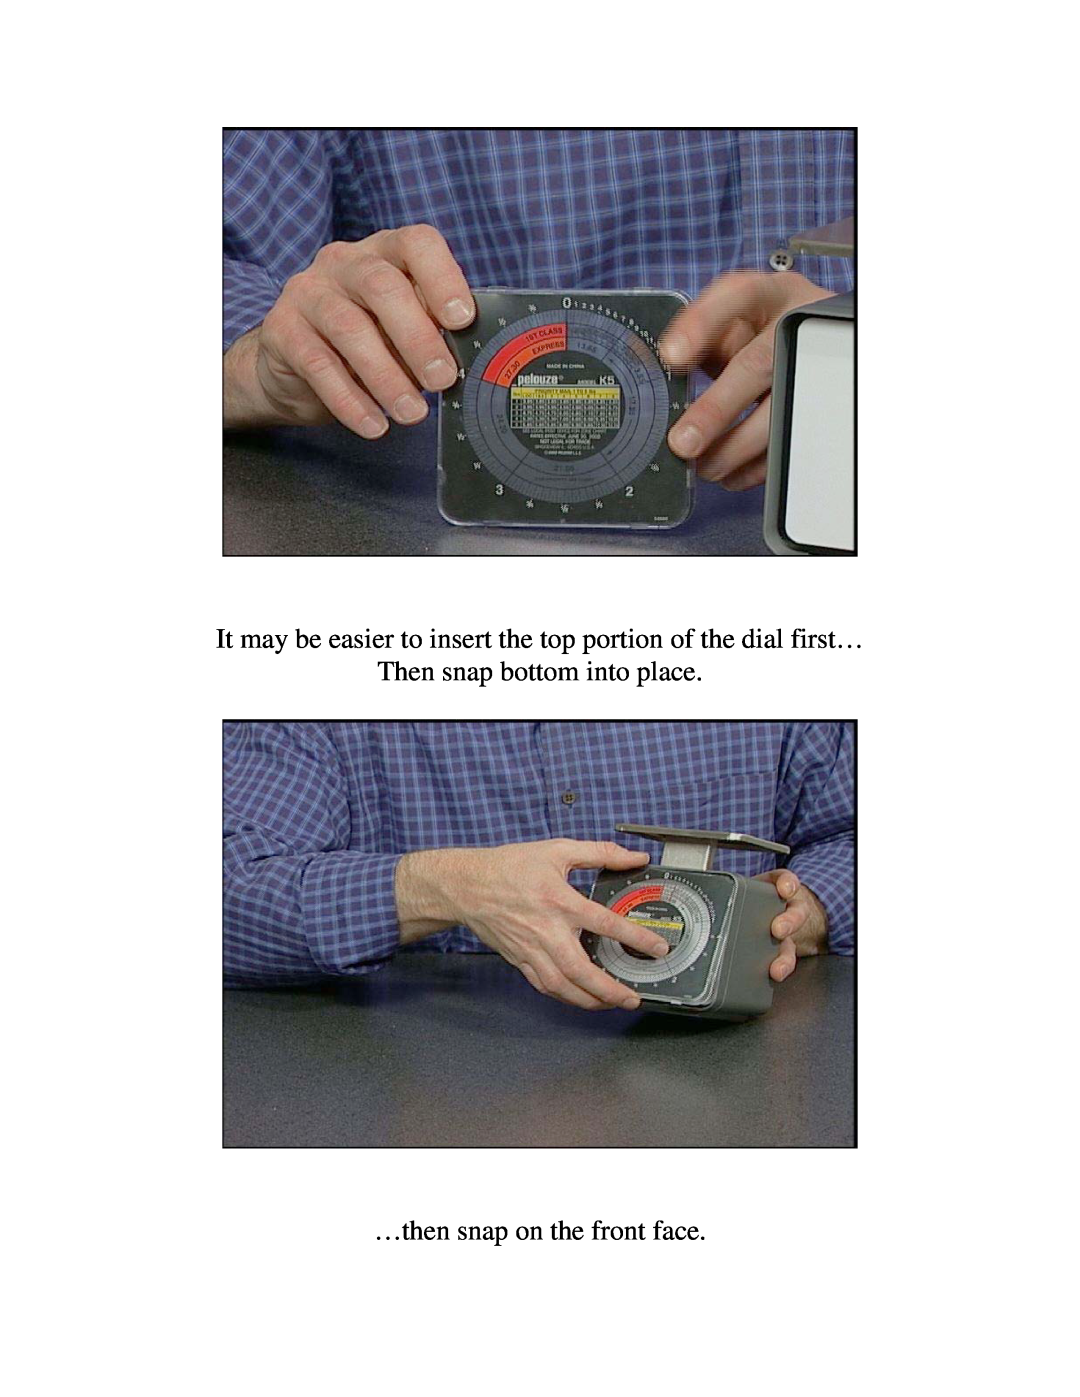 Dymo K5 manual It may be easier to insert the top portion of the dial first…, Then snap bottom into place 